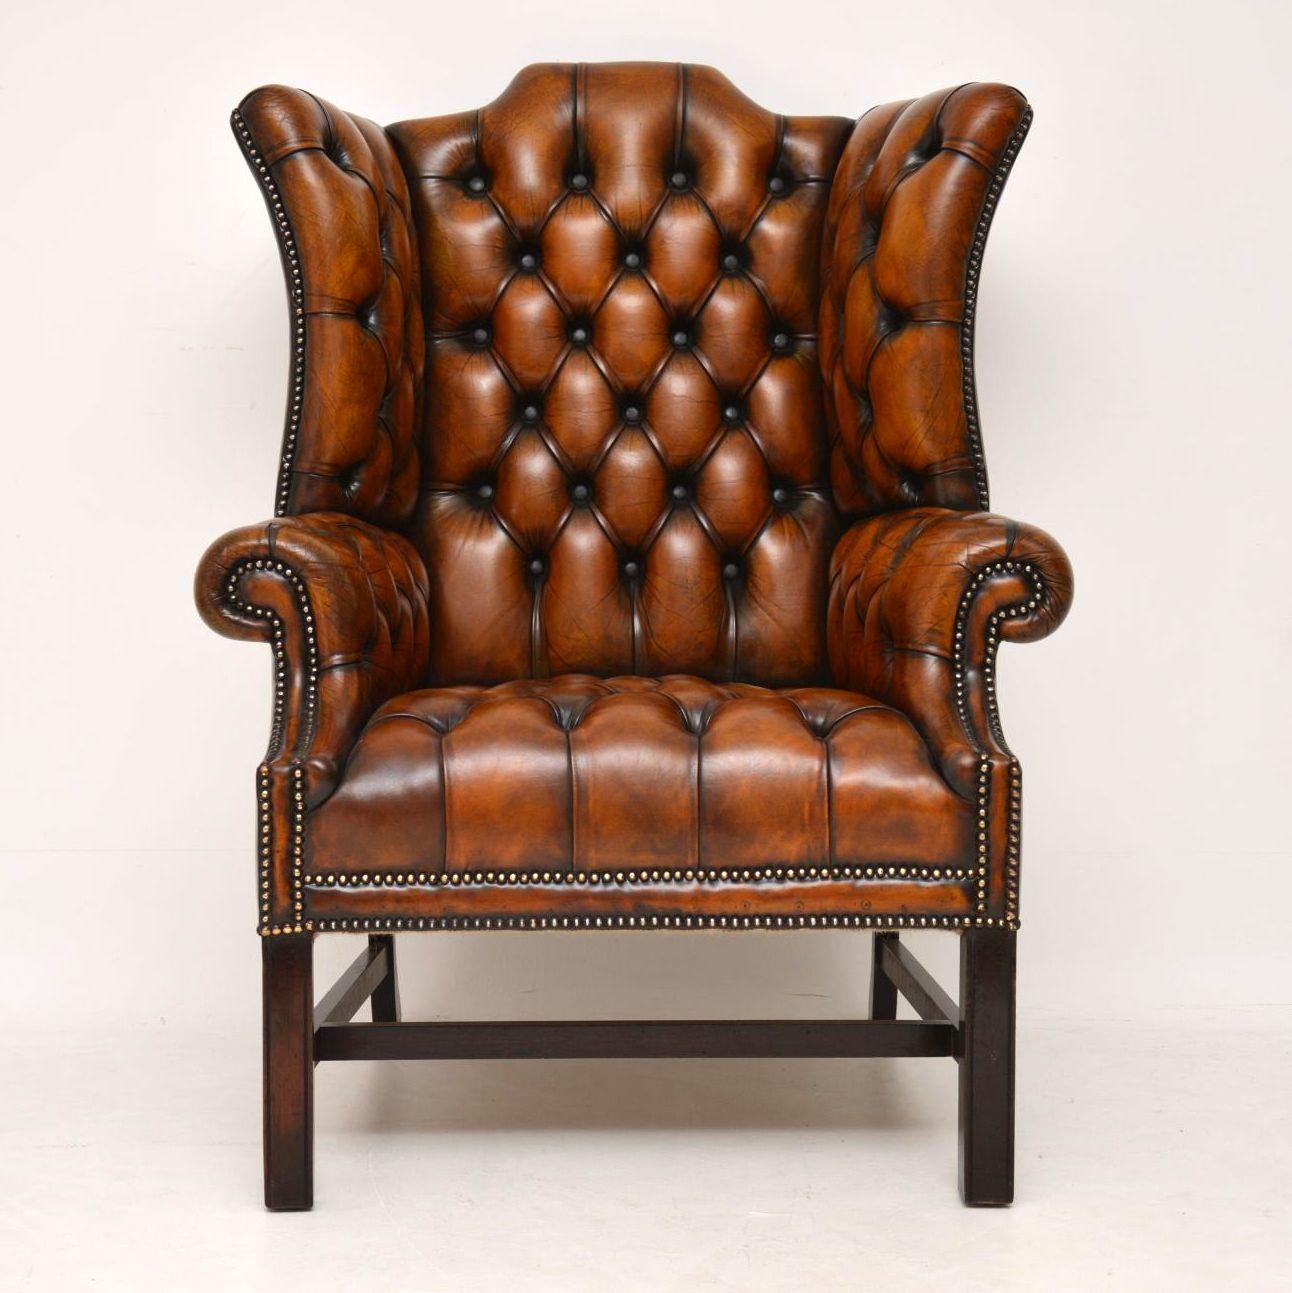 Large antique deep buttoned leather wing armchair in great condition, with loads of character and a lovely original color. This chair is very comfortable, with good back & head support. It has a high hump back, with deep shaped out wings, deep